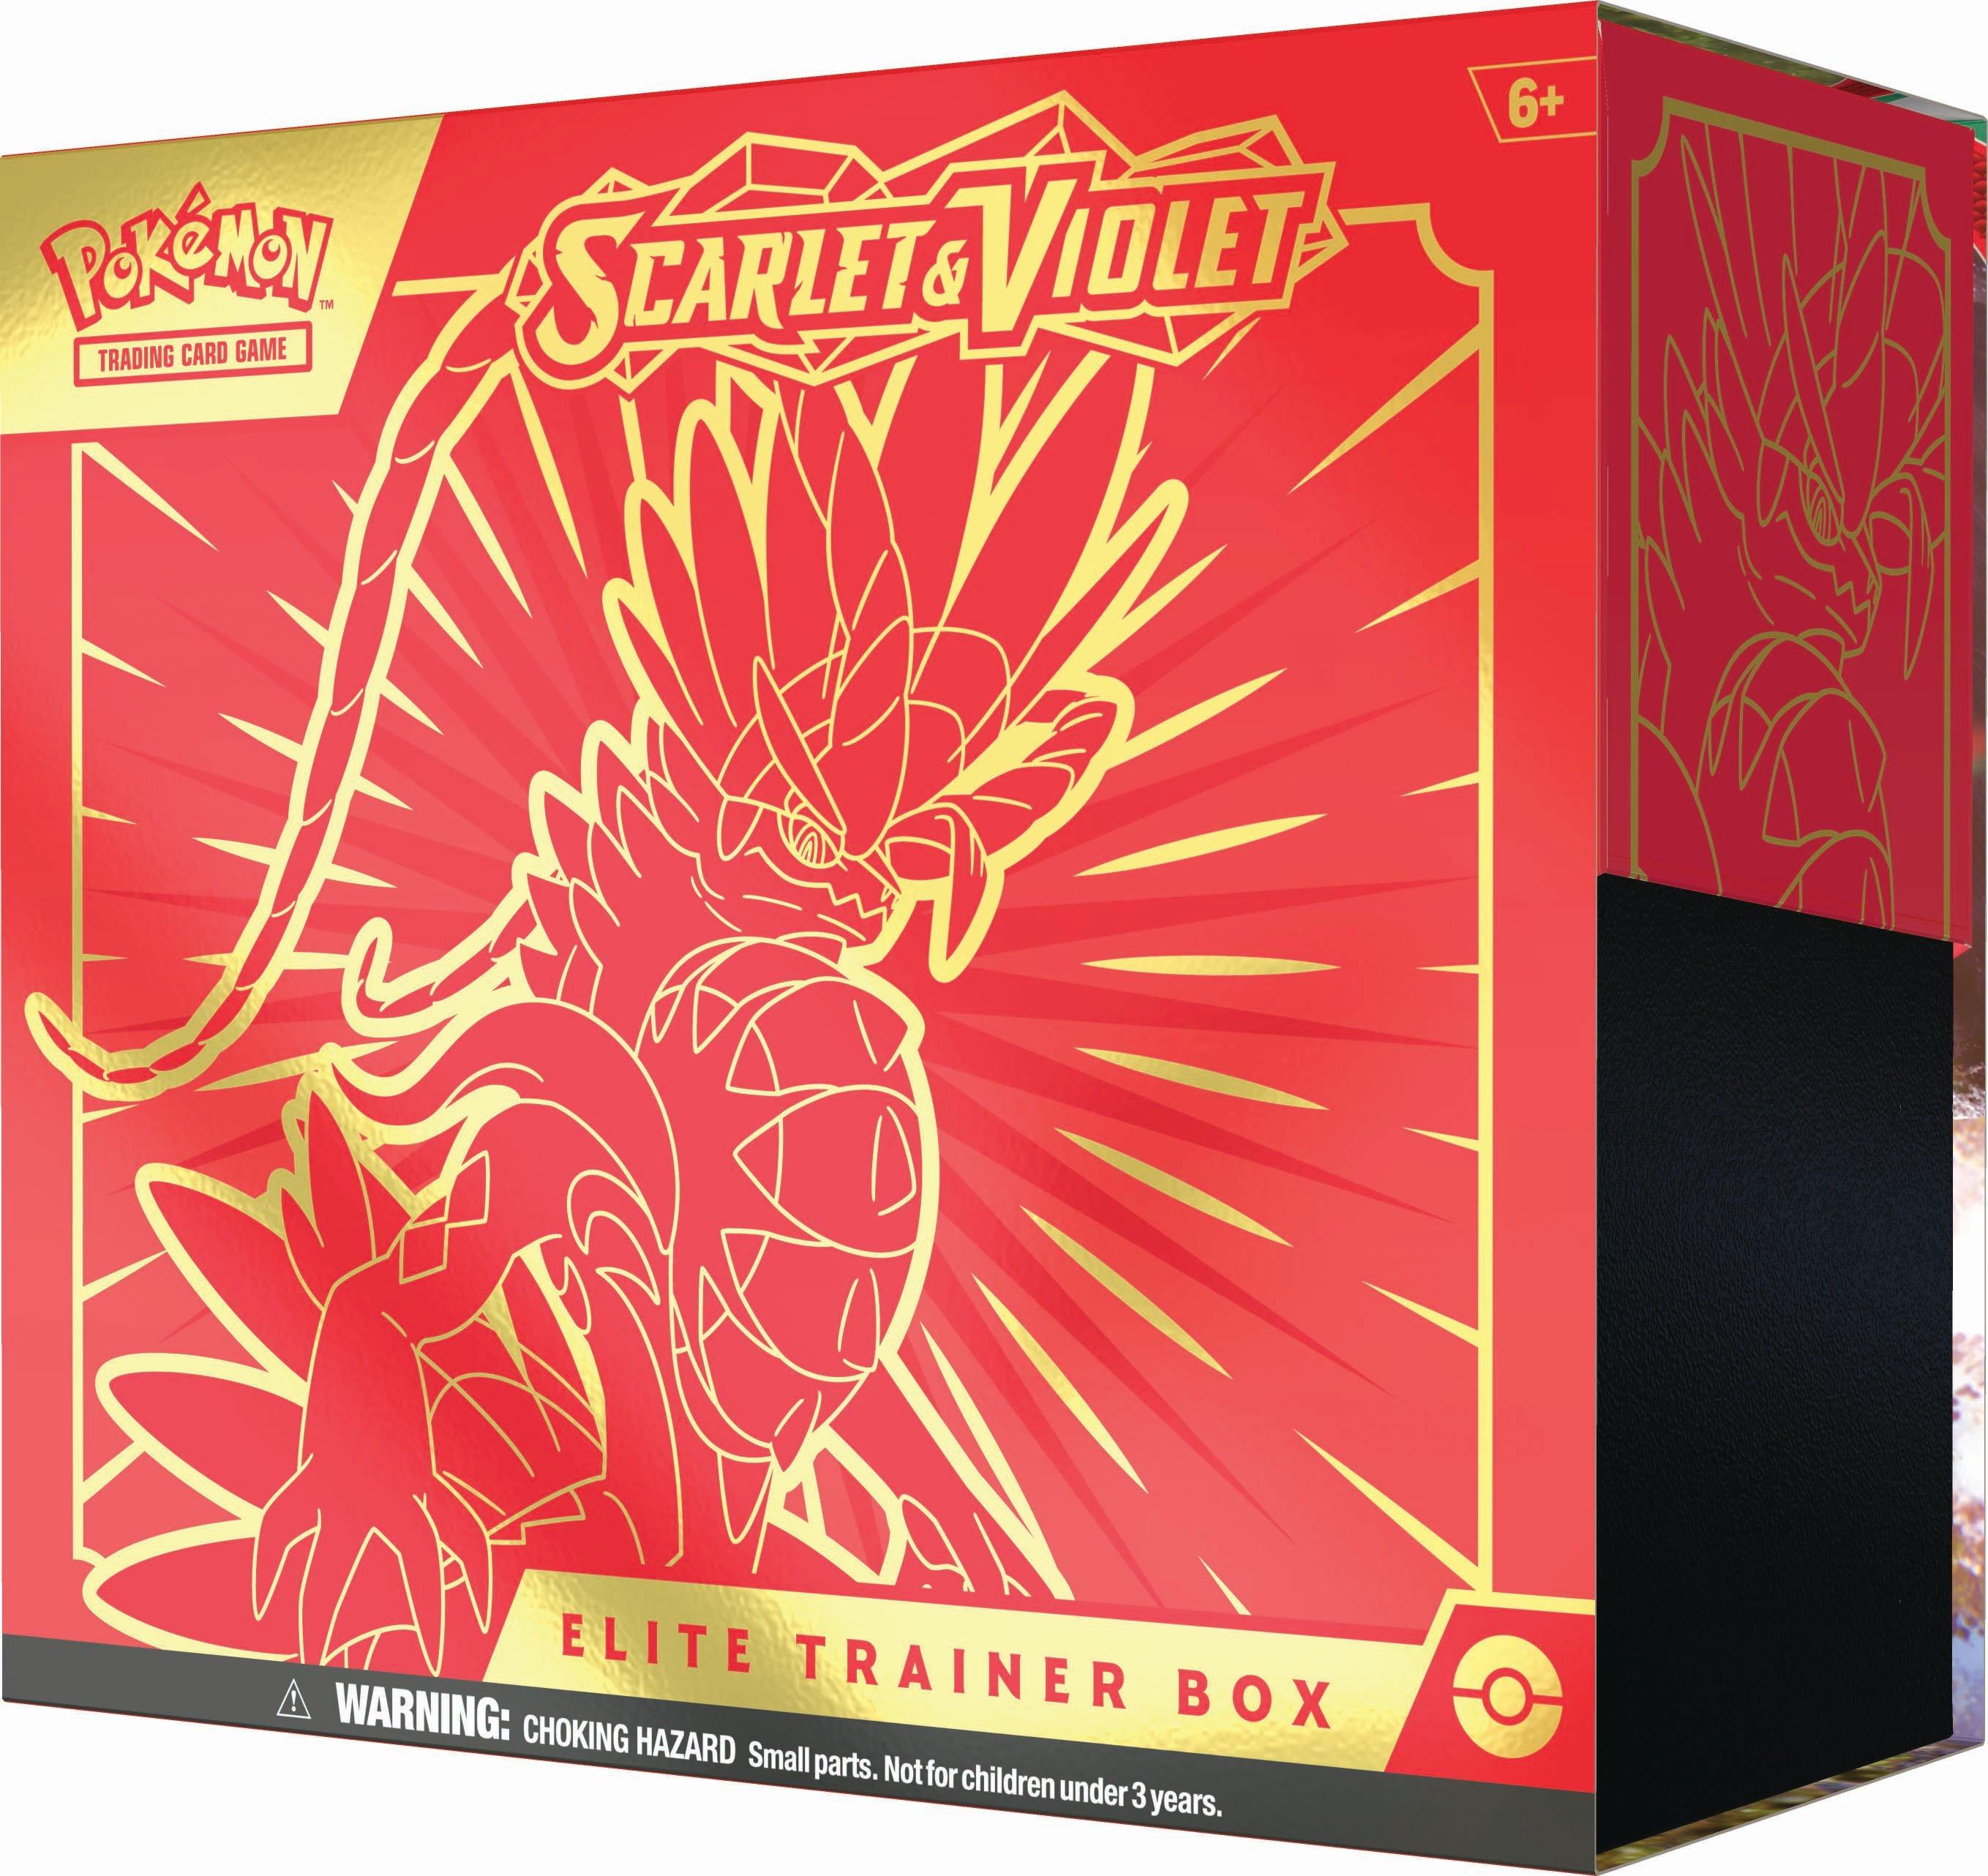 Pokemon Trading Card Game: Scarlet and Violet Elite Trainer Box (Styles May Vary)